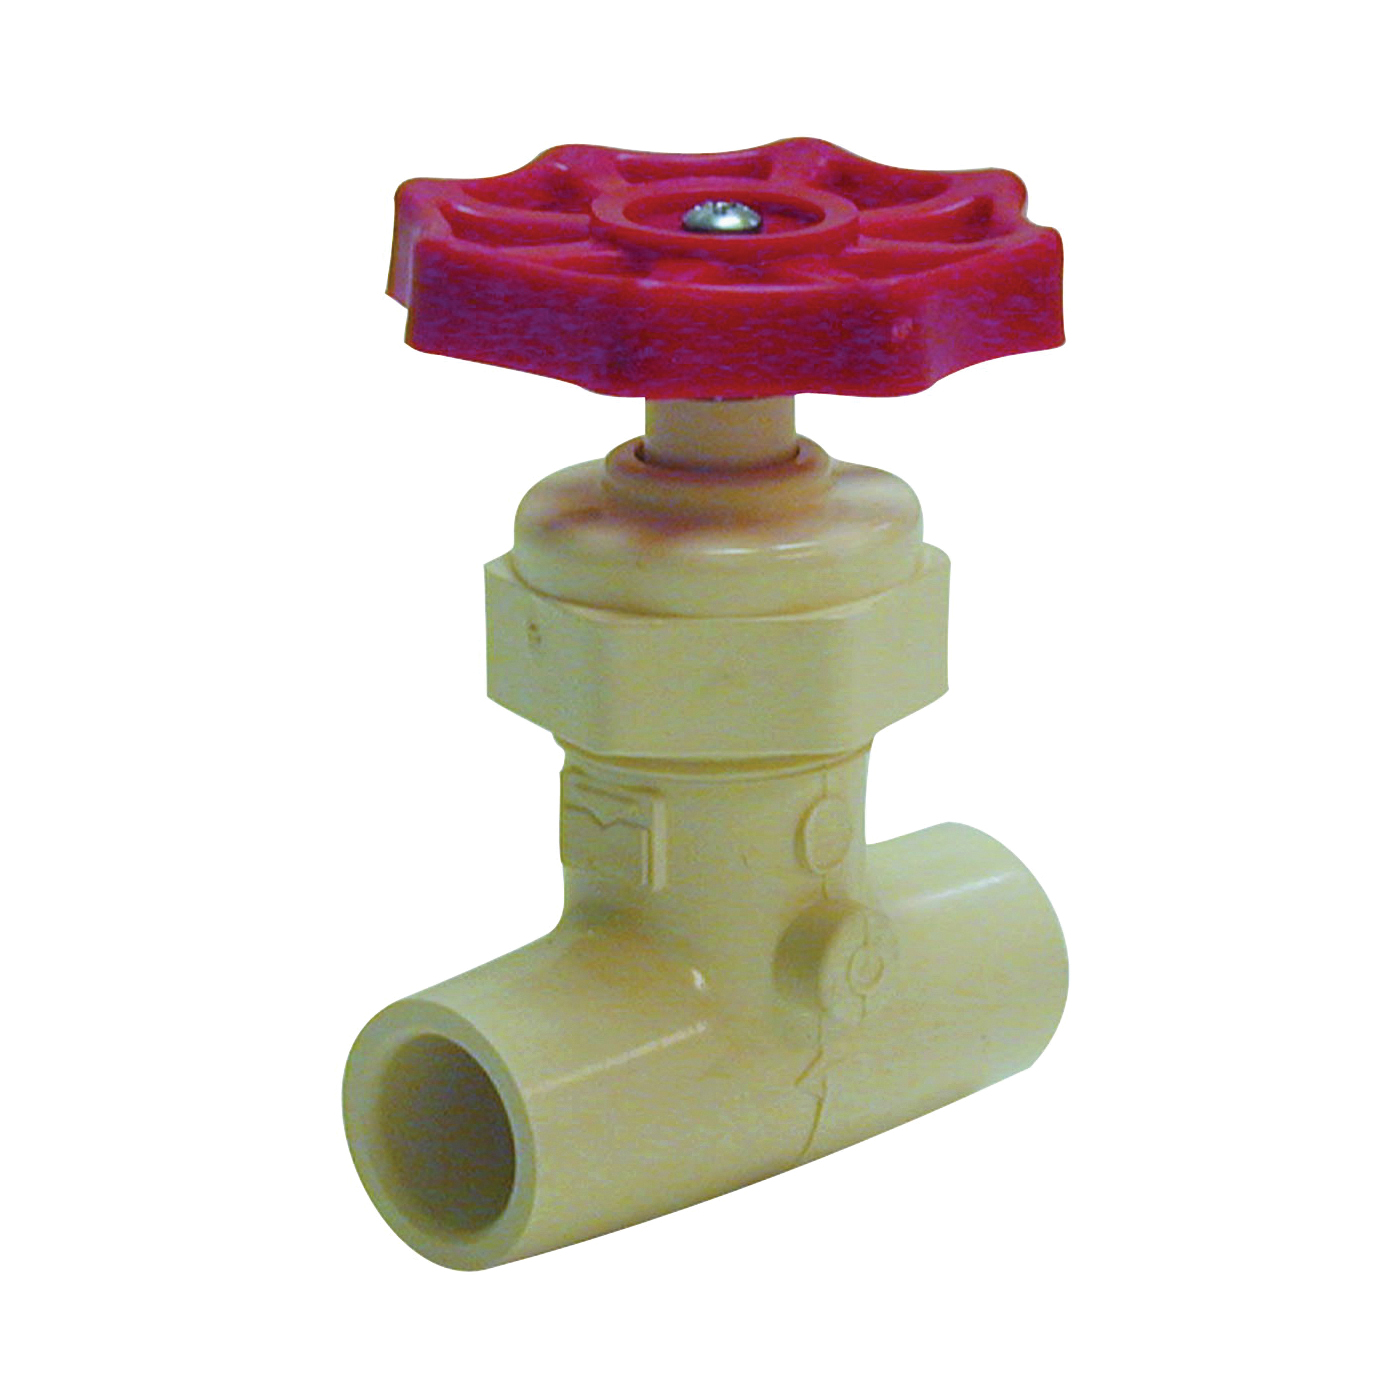 B & K 105-224 Stop Valve, 3/4 in Connection, Solvent Weld, 100 psi Pressure, CPVC Body